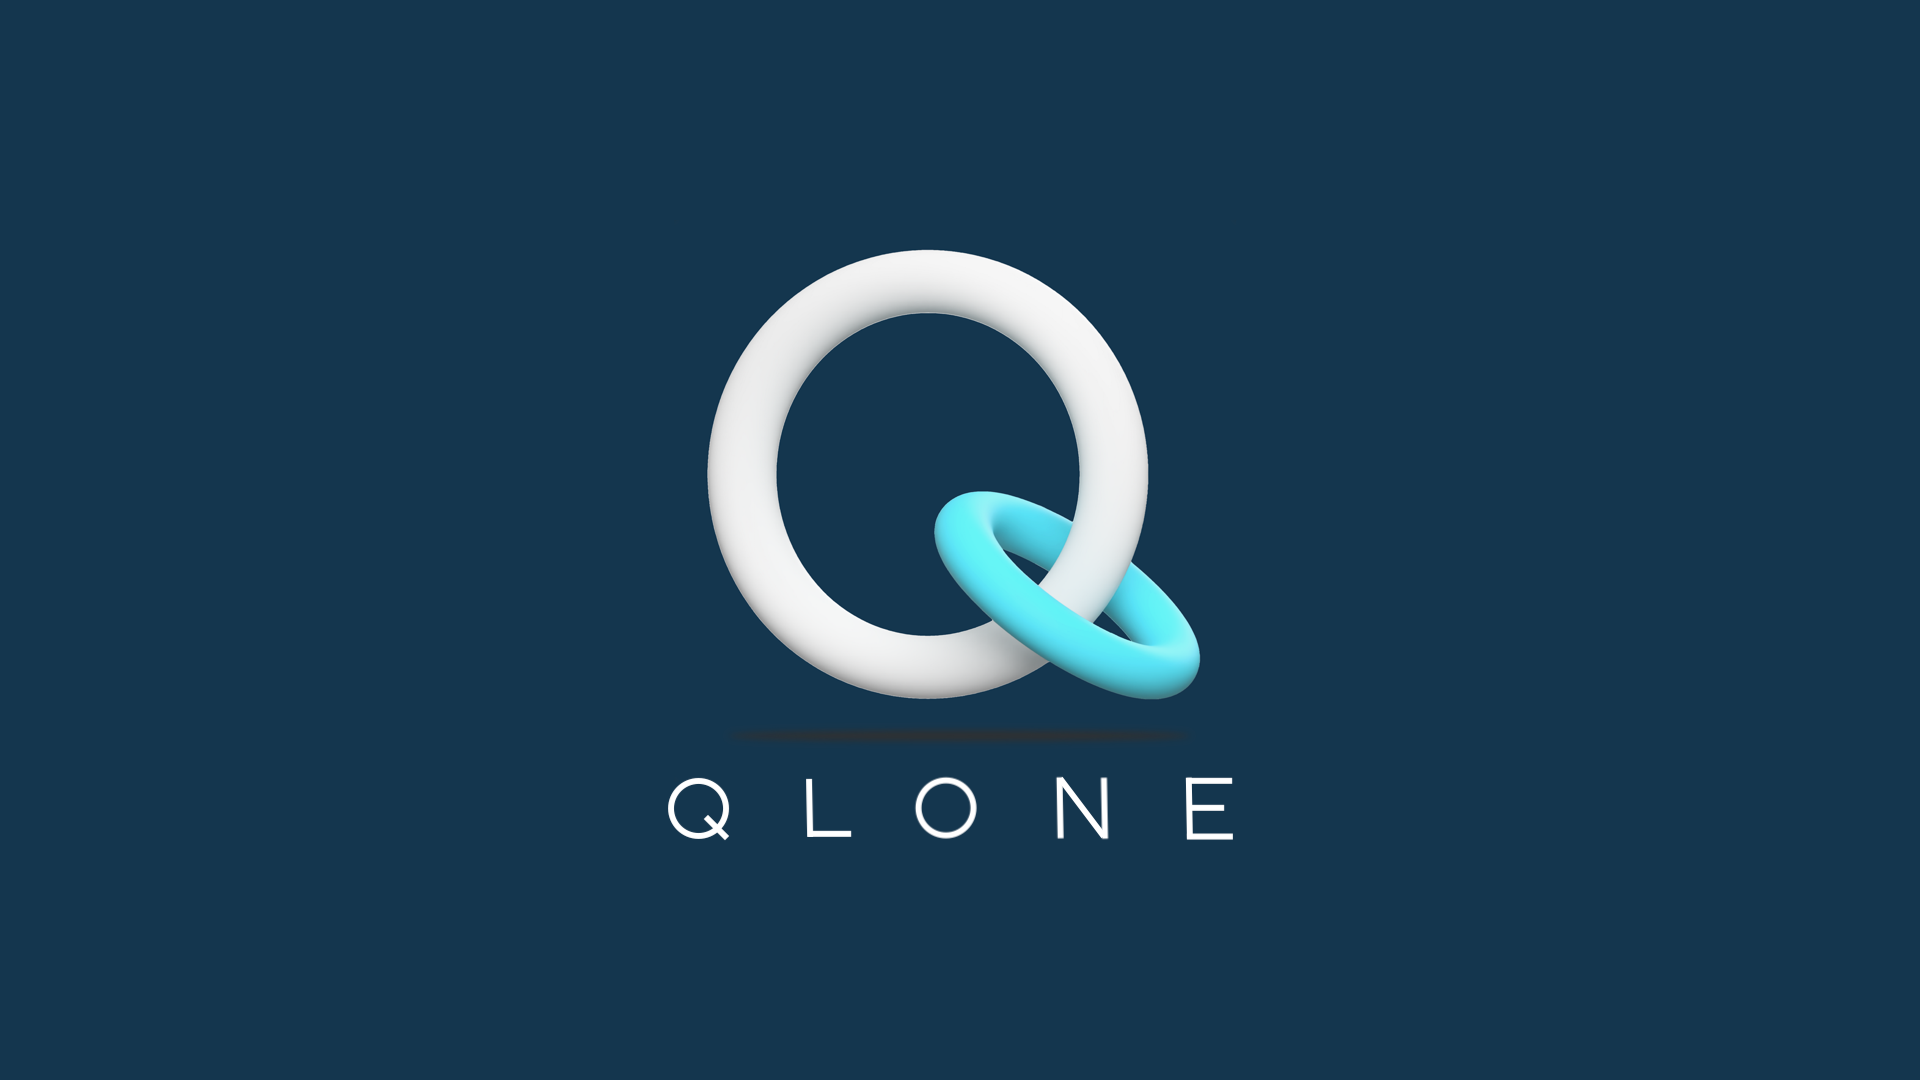 Qlone - An app to convert photos to 3D models for augmented reality